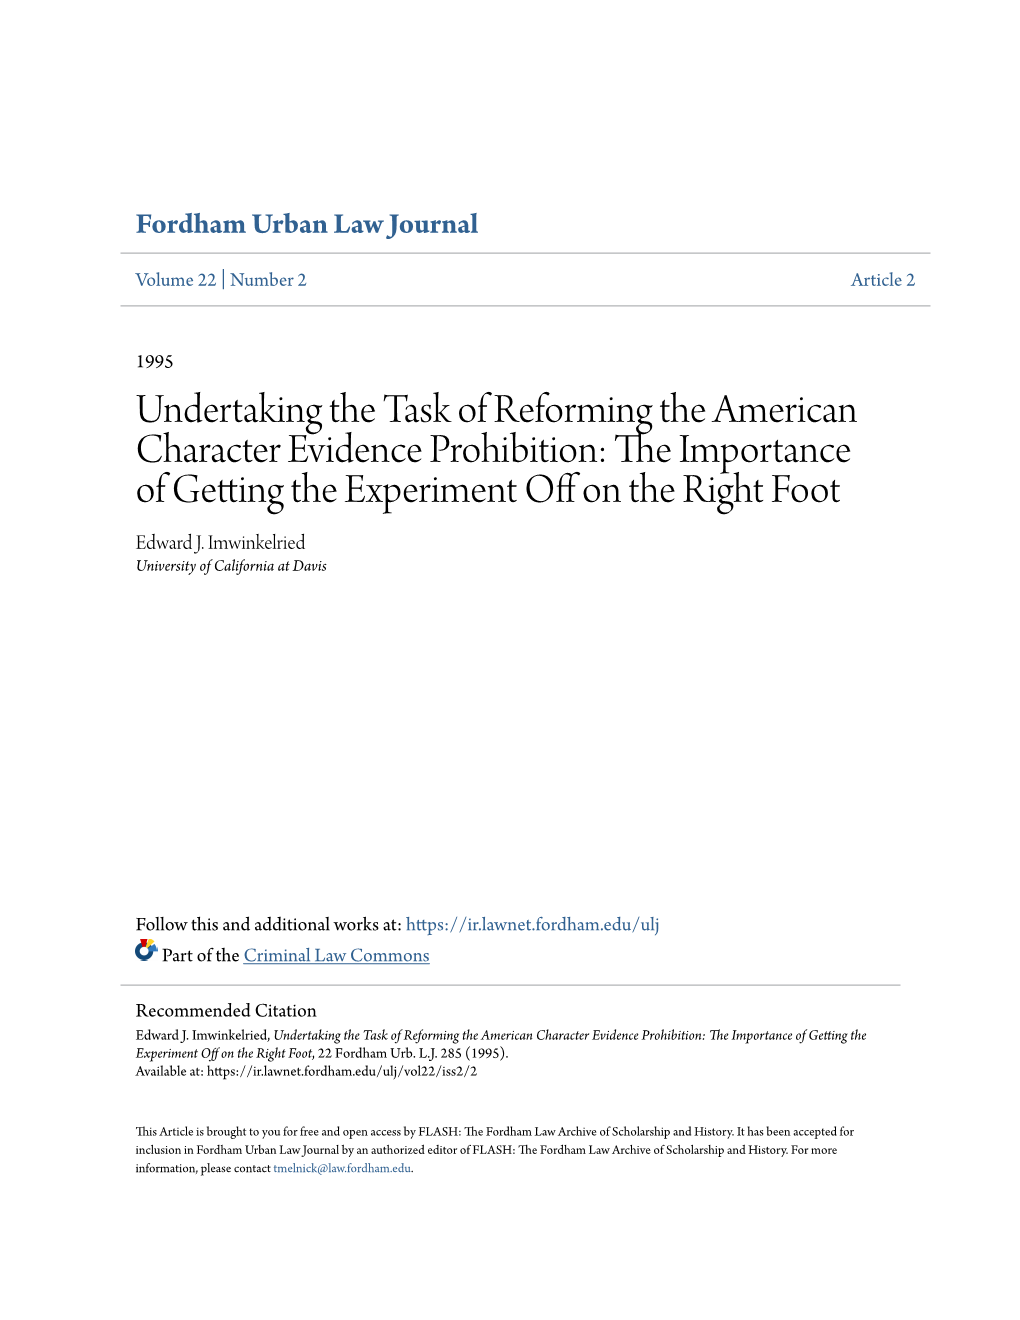 Undertaking the Task of Reforming the American Character Evidence Prohibition: the Mpi Ortance of Getting the Experiment Off on the Right Foot Edward J